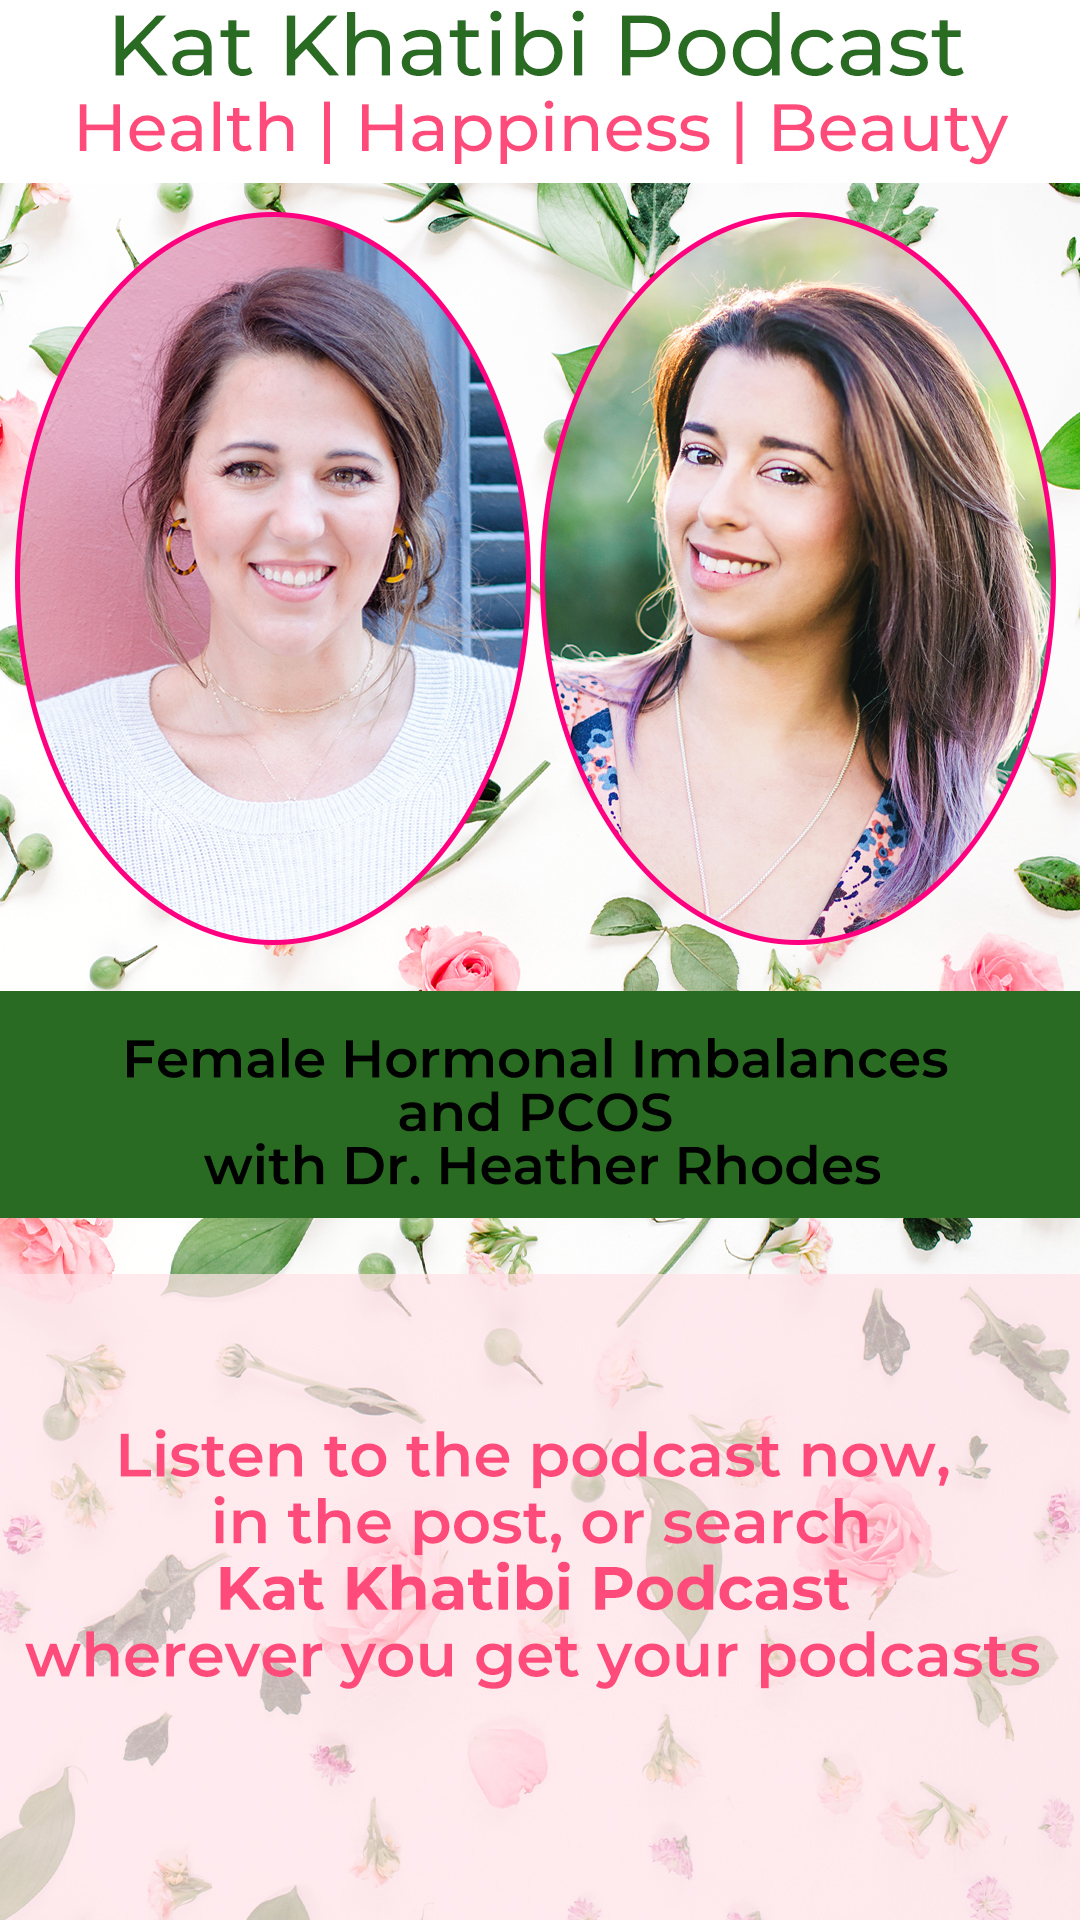 Female Hormonal Imbalances and PCOS with Dr. Heather Rhodes